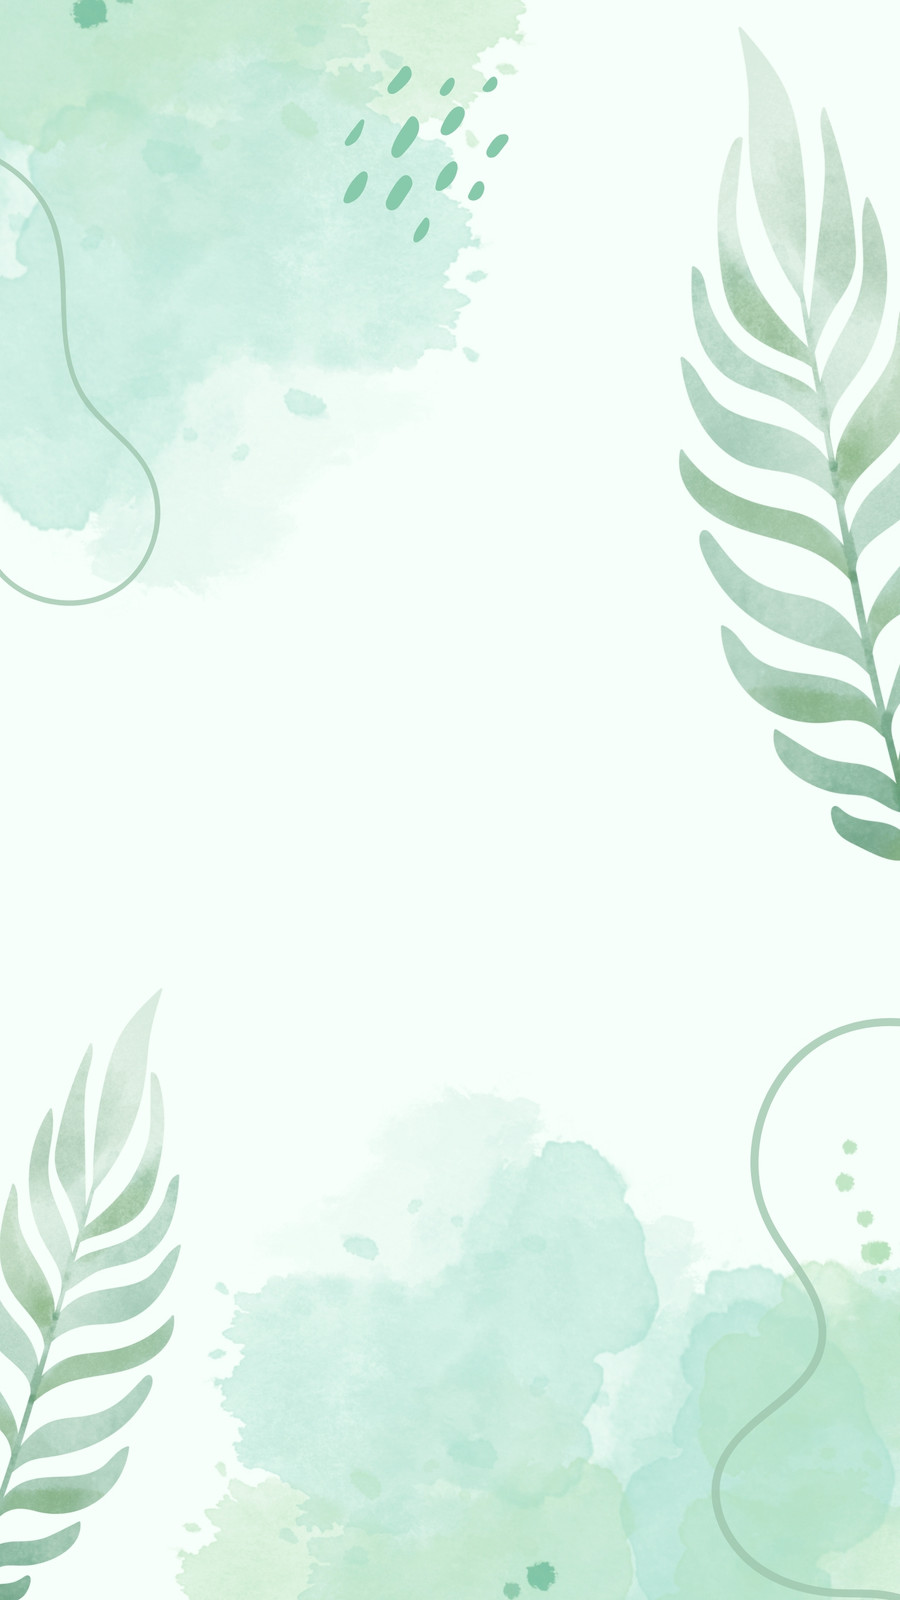 Free and customizable wallpaper green templates